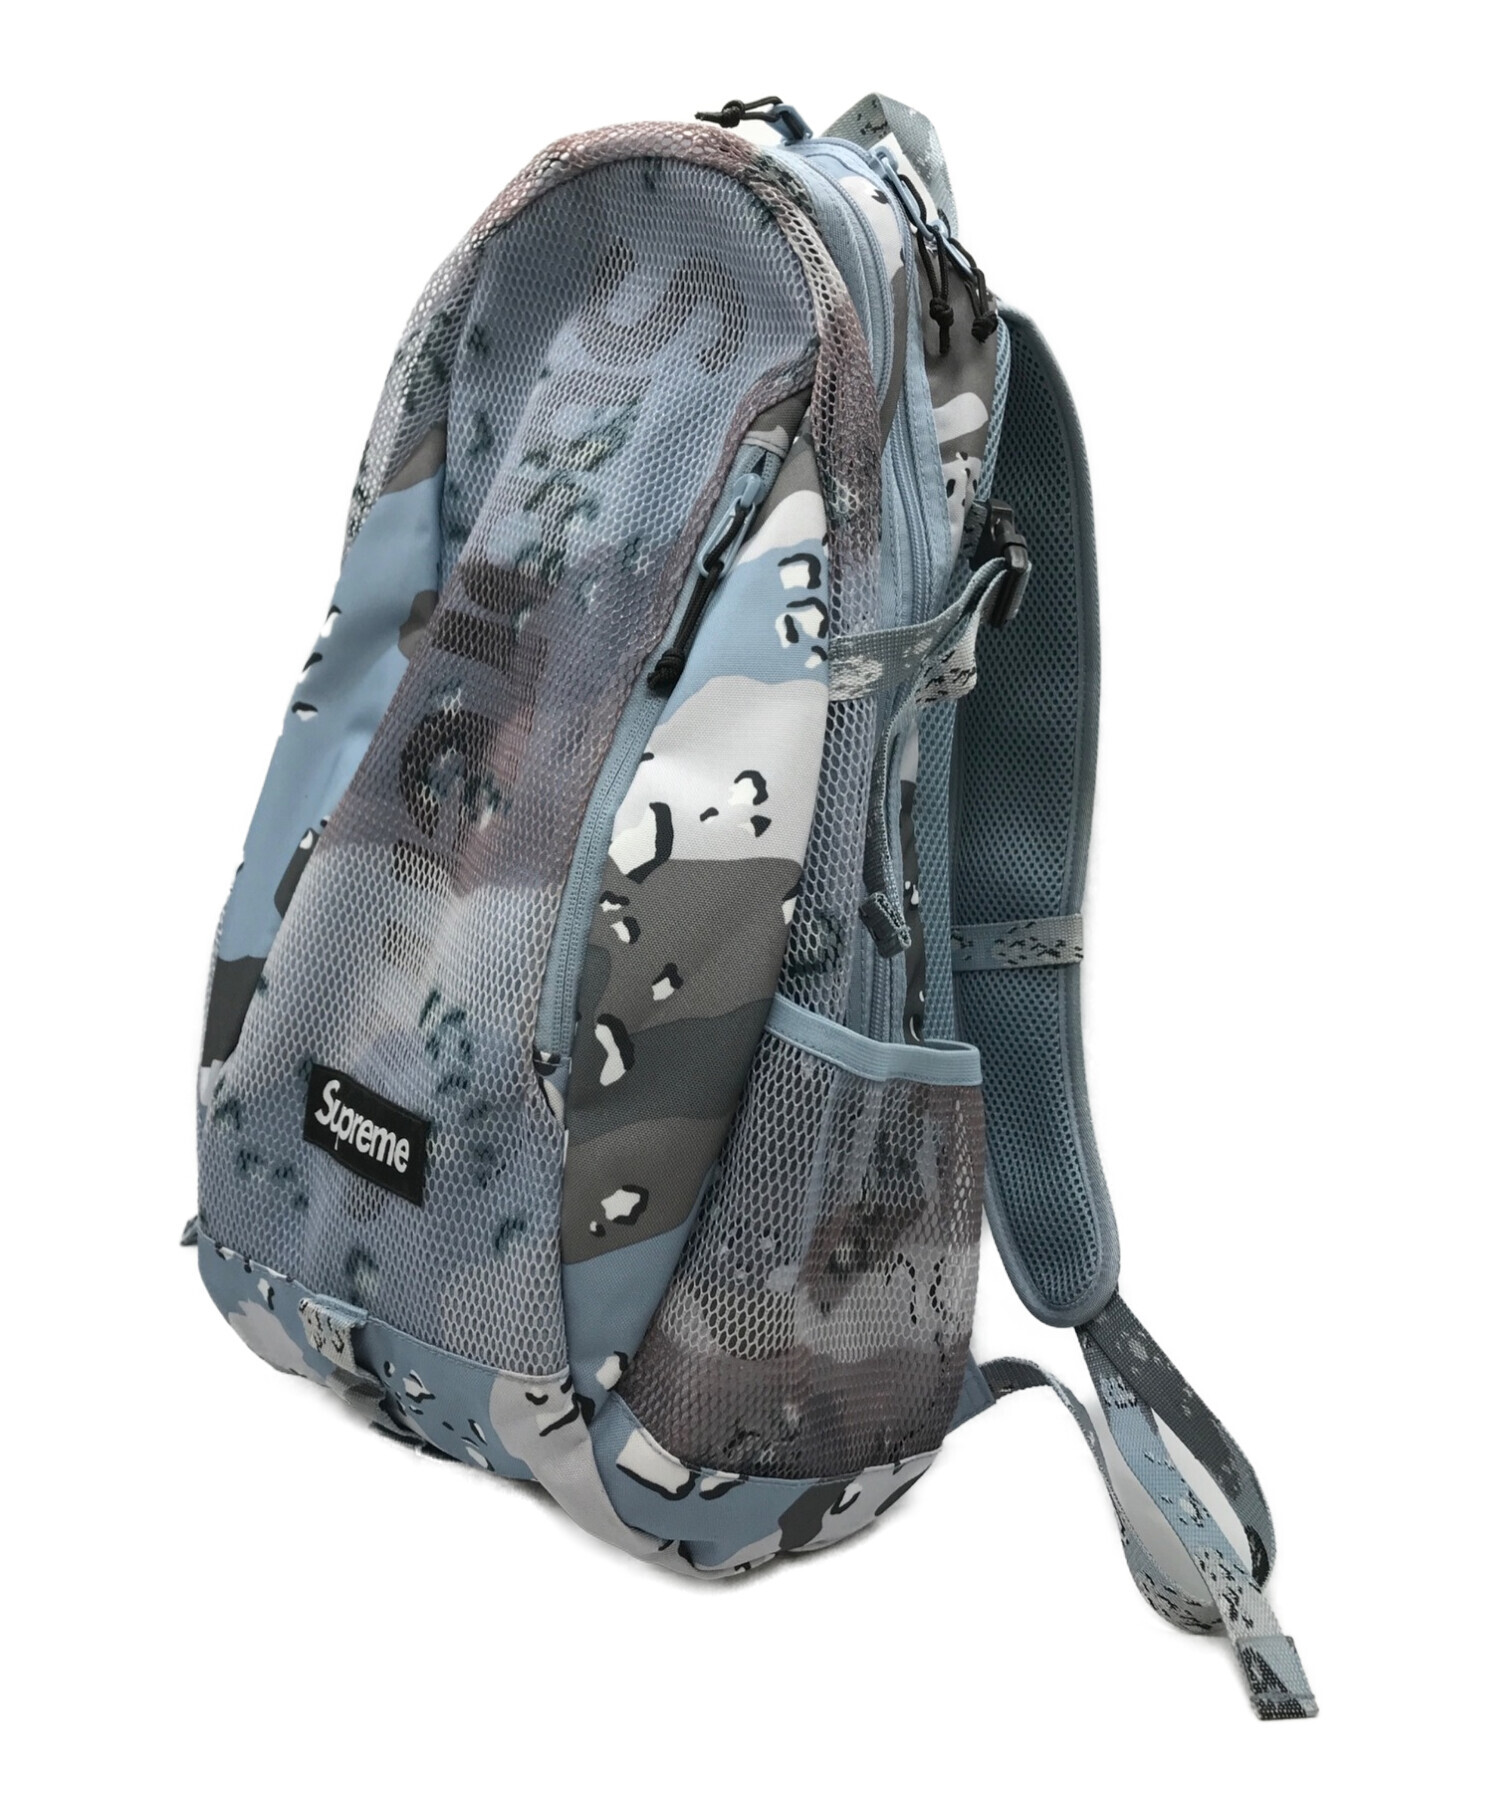 supreme back pack blue chocolate chip